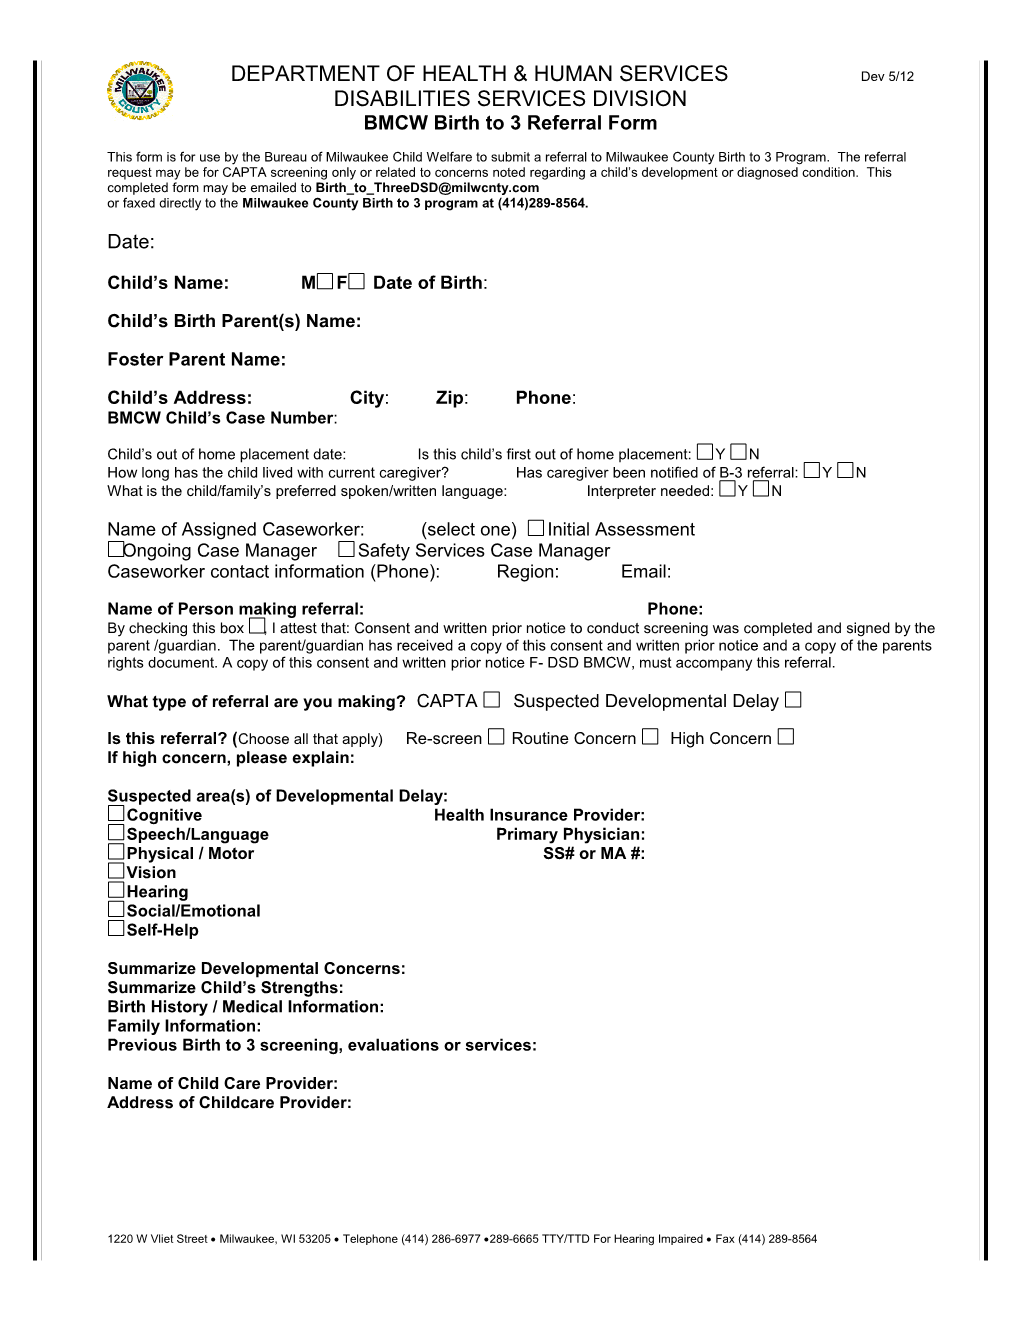 This Form Is for Use by the Bureau of Milwaukee Child Welfare to Submit a Request for A